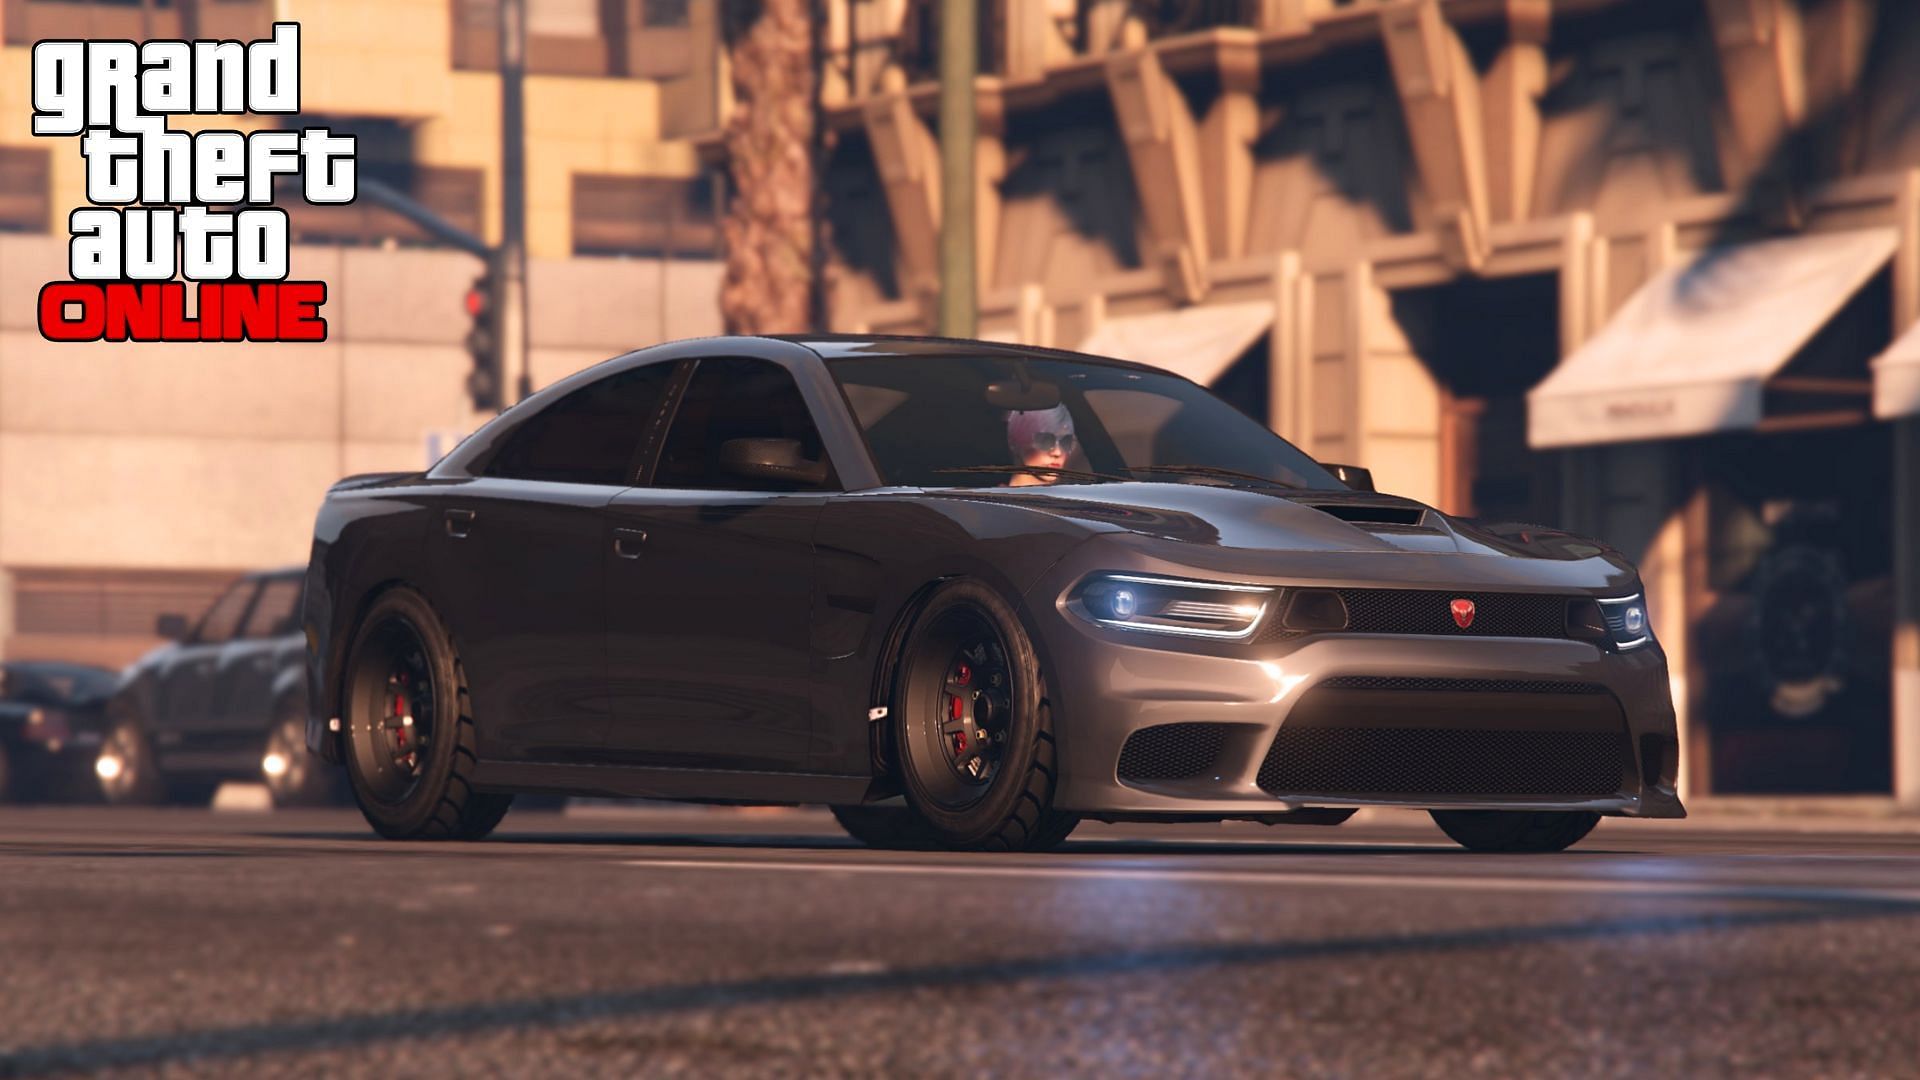 The Bravado Buffalo STX is one of the fastest Imani Tech cars in GTA Online (Image via GTA Forums/andyyapi)